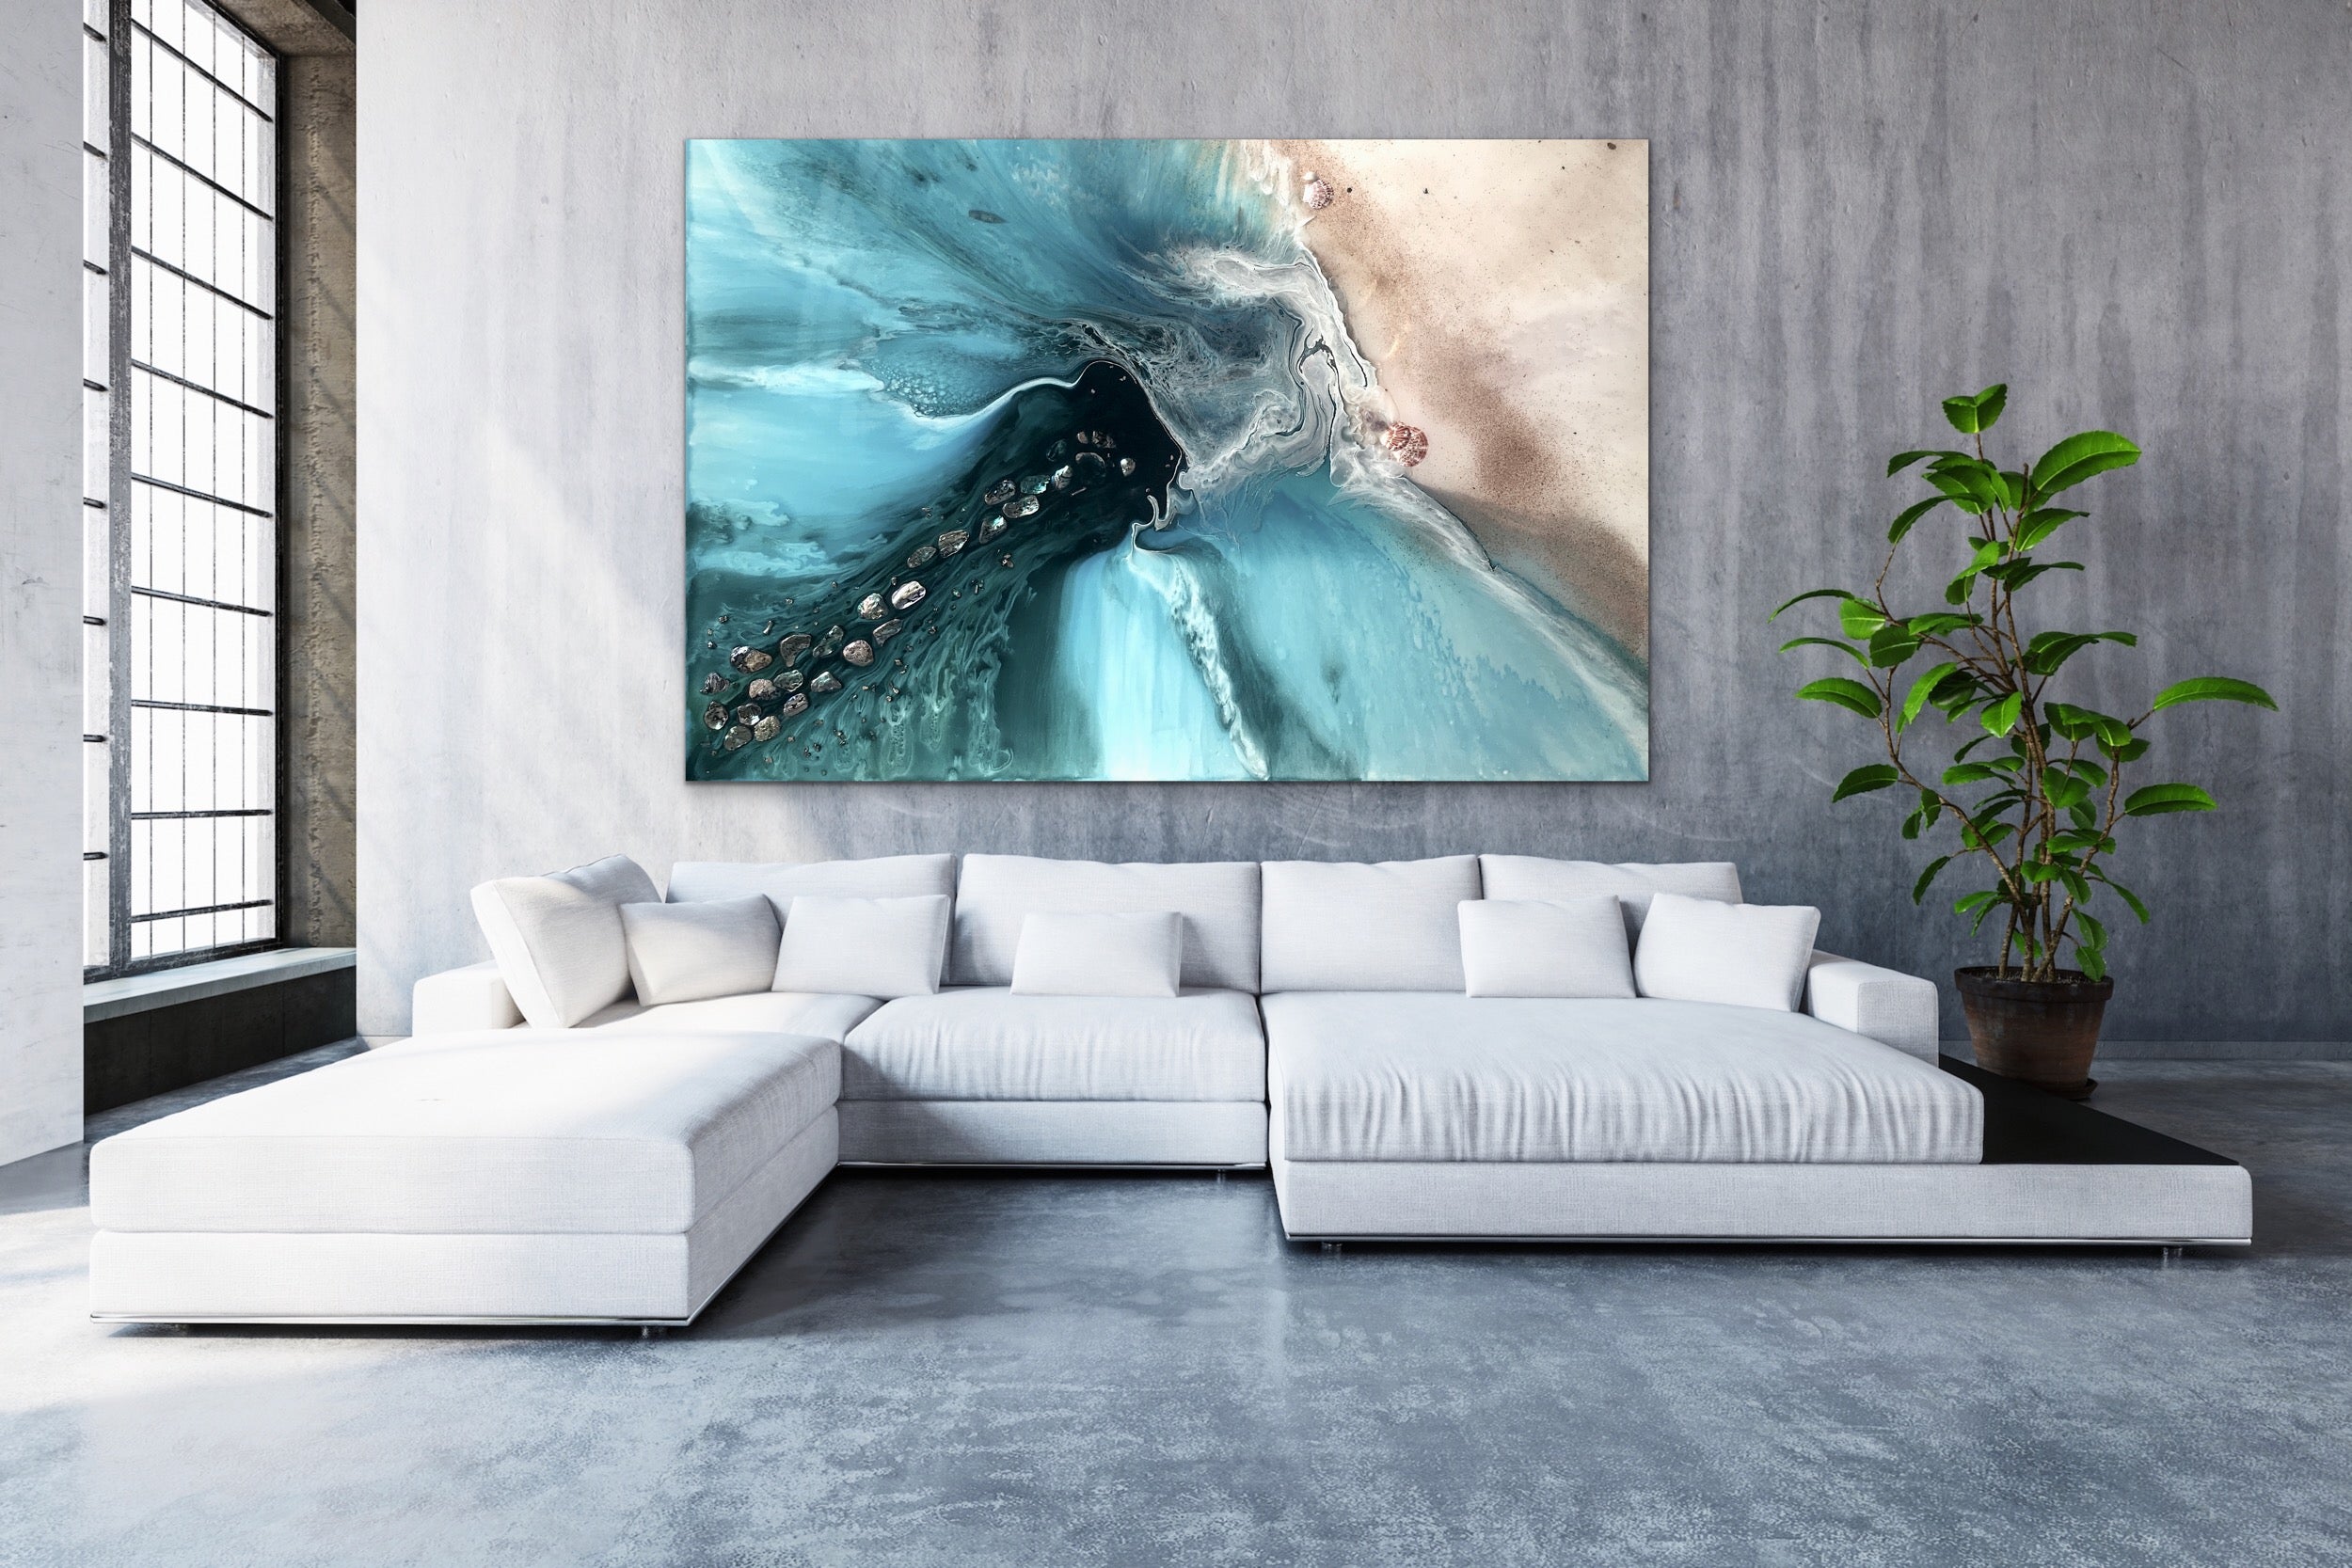 Abstract Sea. Muted Teal. Rise Above 4 Neutral. Art print. Antuanelle 6 Ocean Seascape. Limited Edition Print